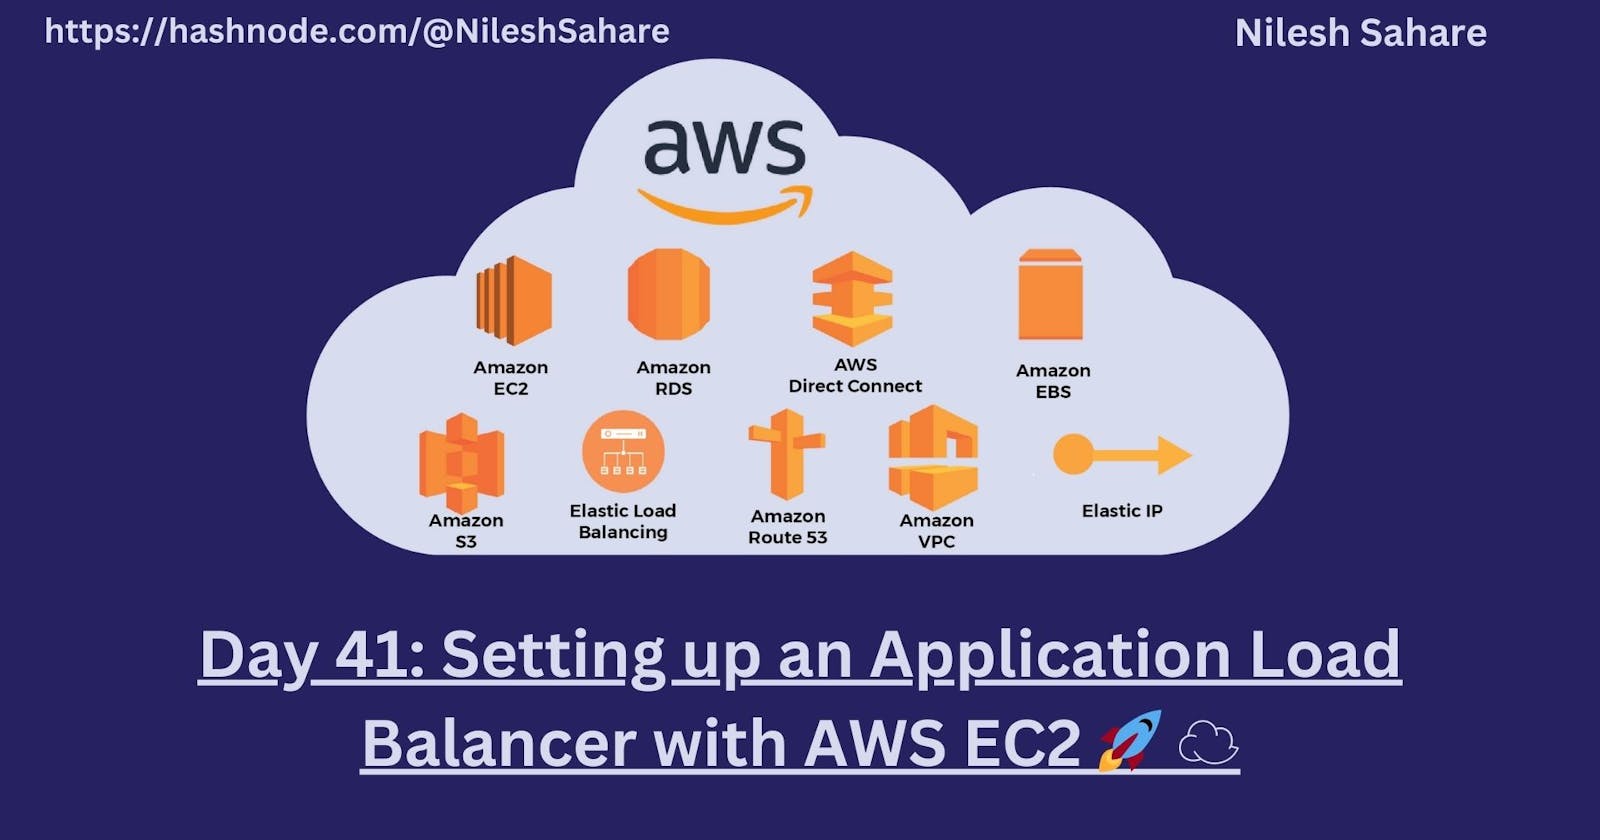 Day 41 Task: Setting up an Application Load Balancer with AWS EC2